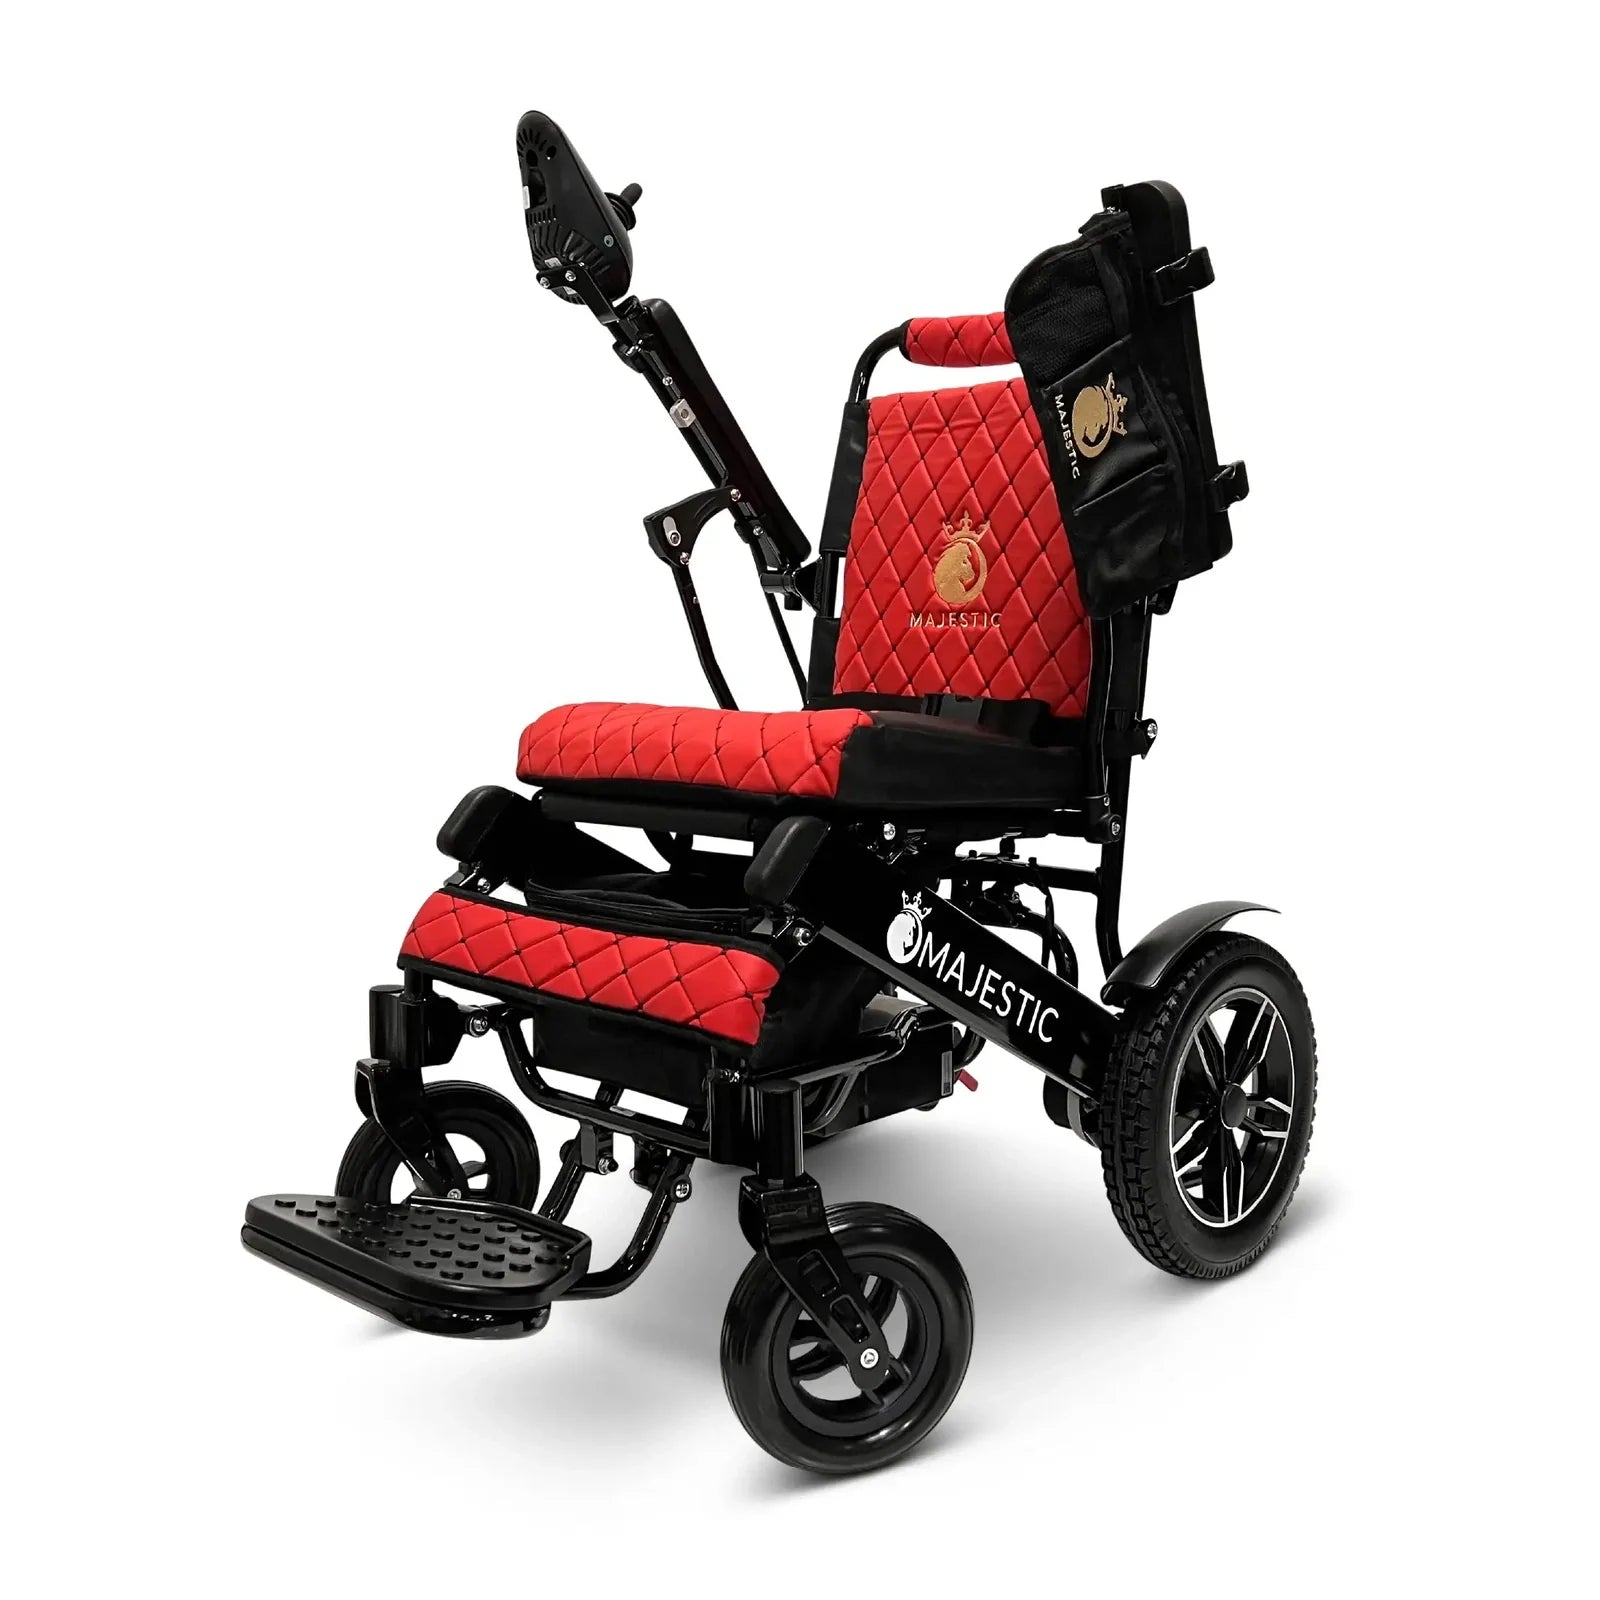 ComfyGO Majestic IQ-8000 Remote Controlled Lightweight Folding Electric Wheelchair Power Wheelchairs ComfyGO Black Red 10 Miles & 17.5" Seat Width